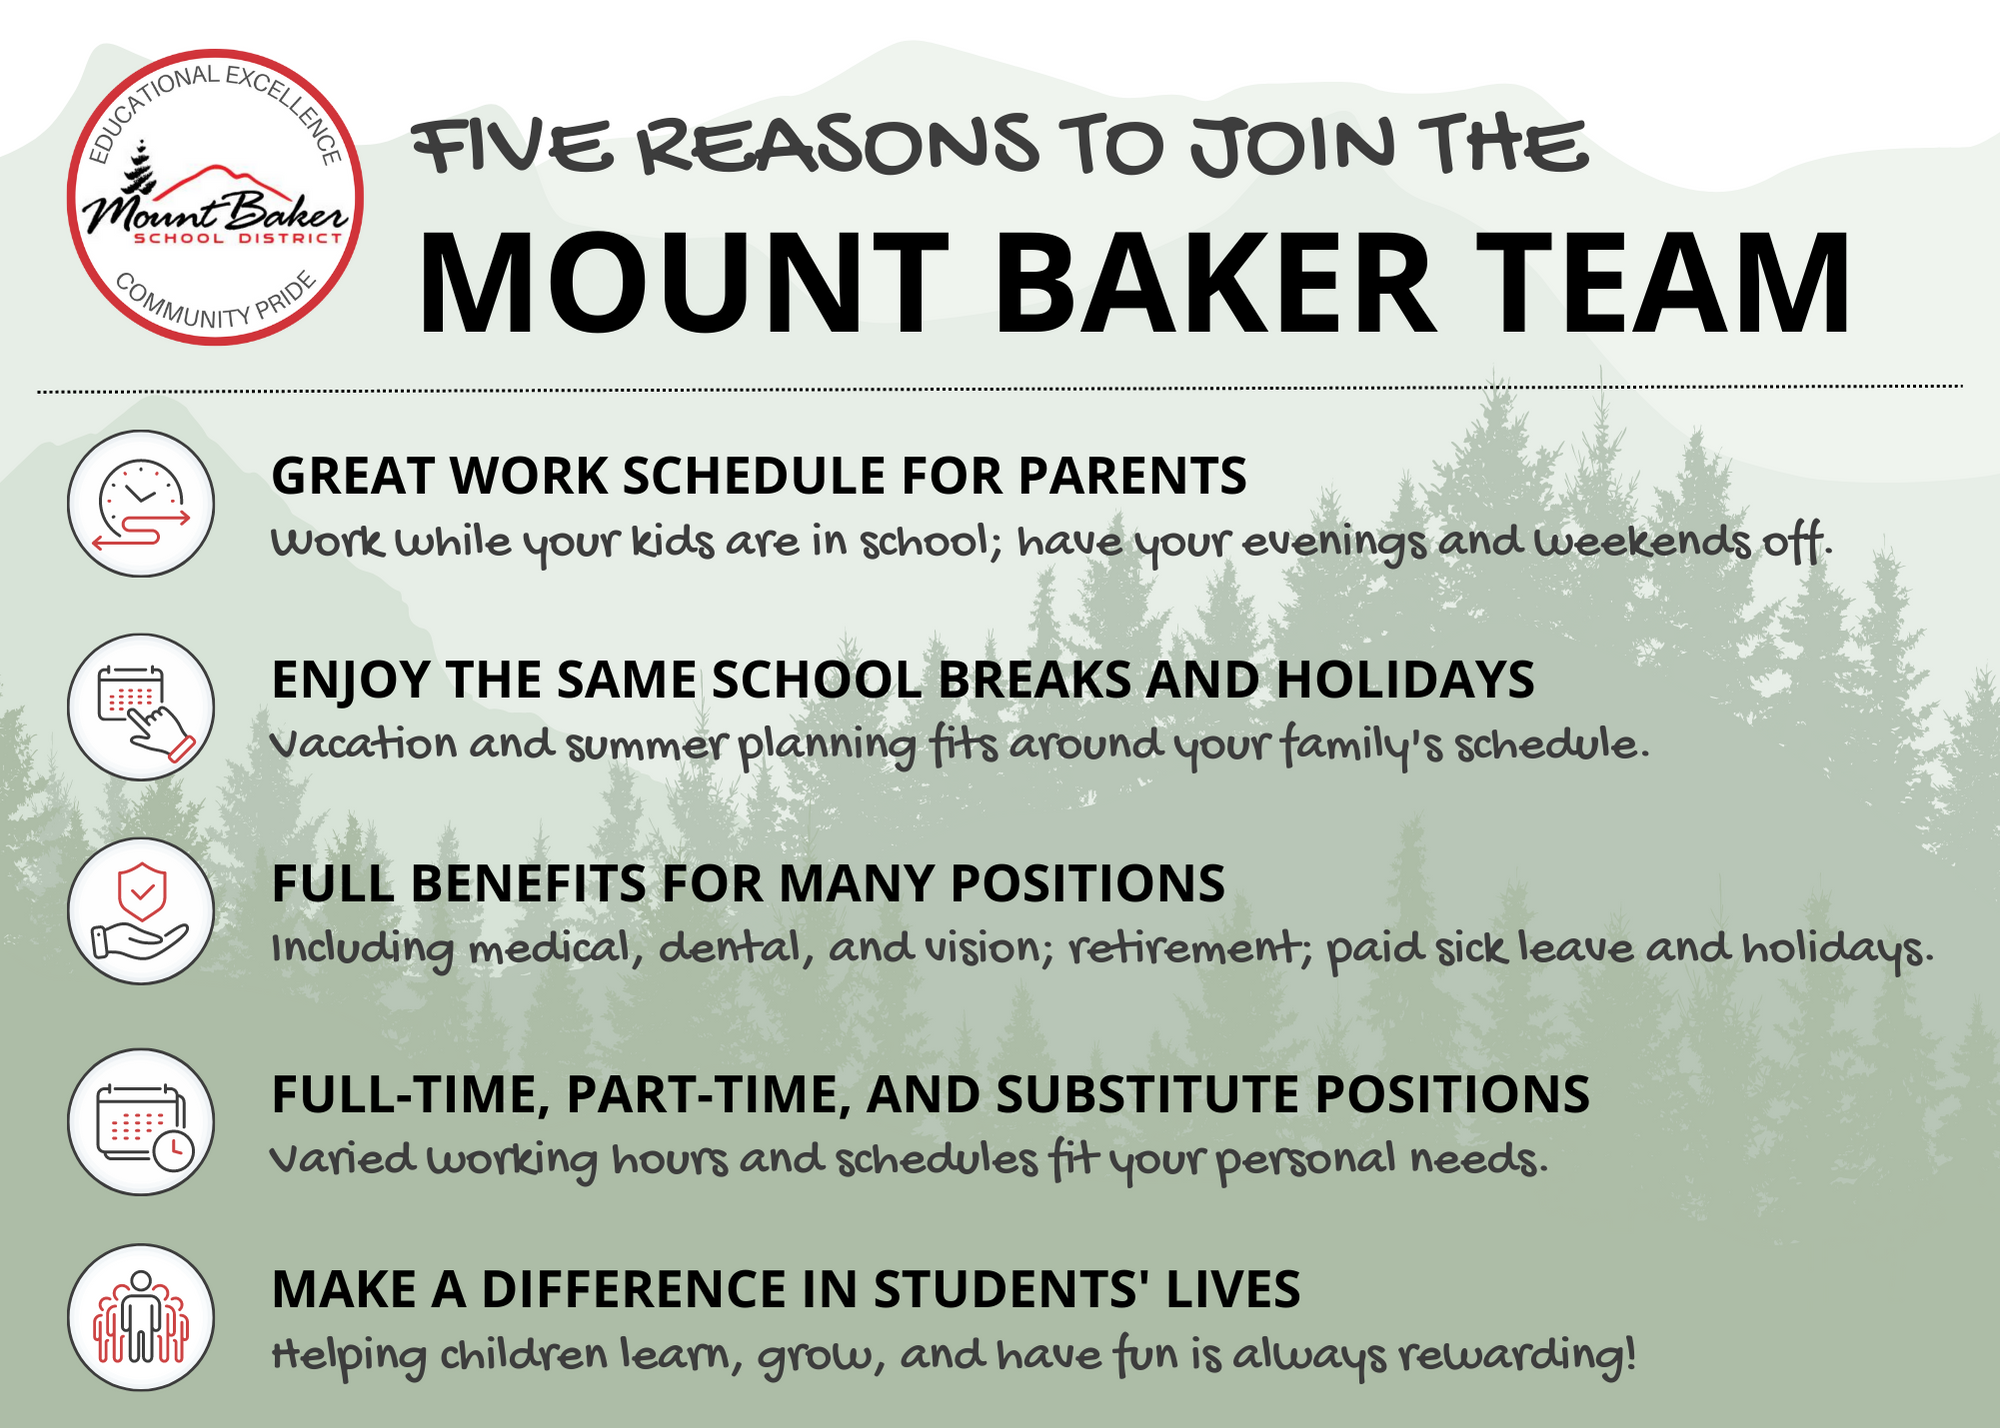 Five reasons to join the Mount Baker Team